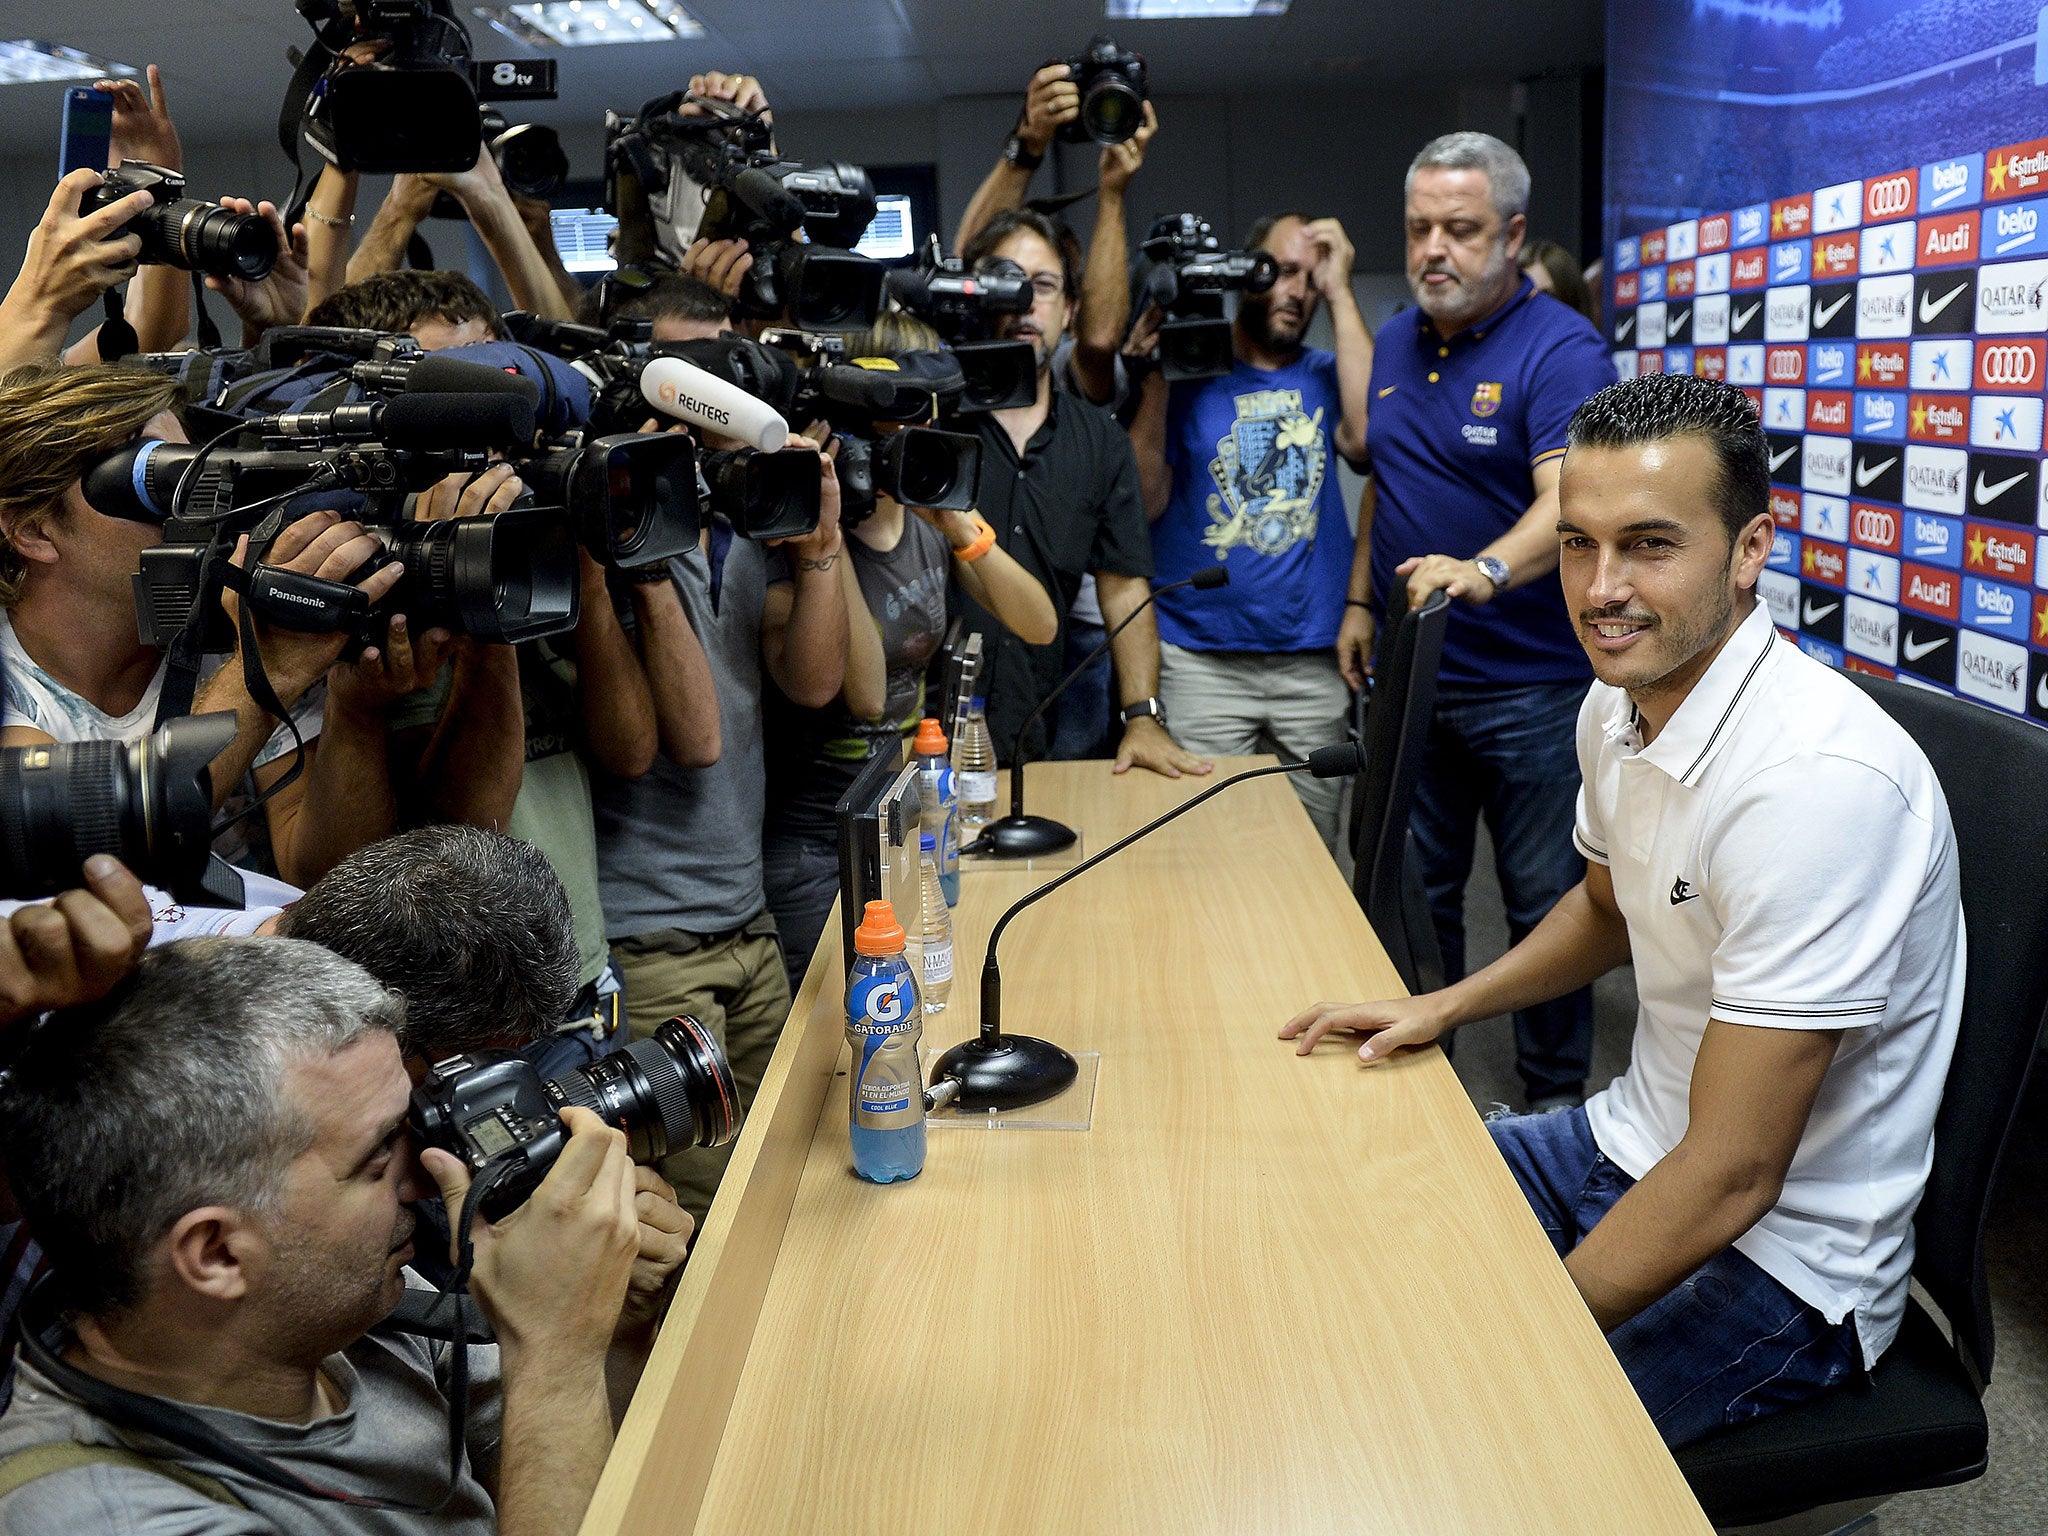 Pedro at his official Barcelona exit press conference